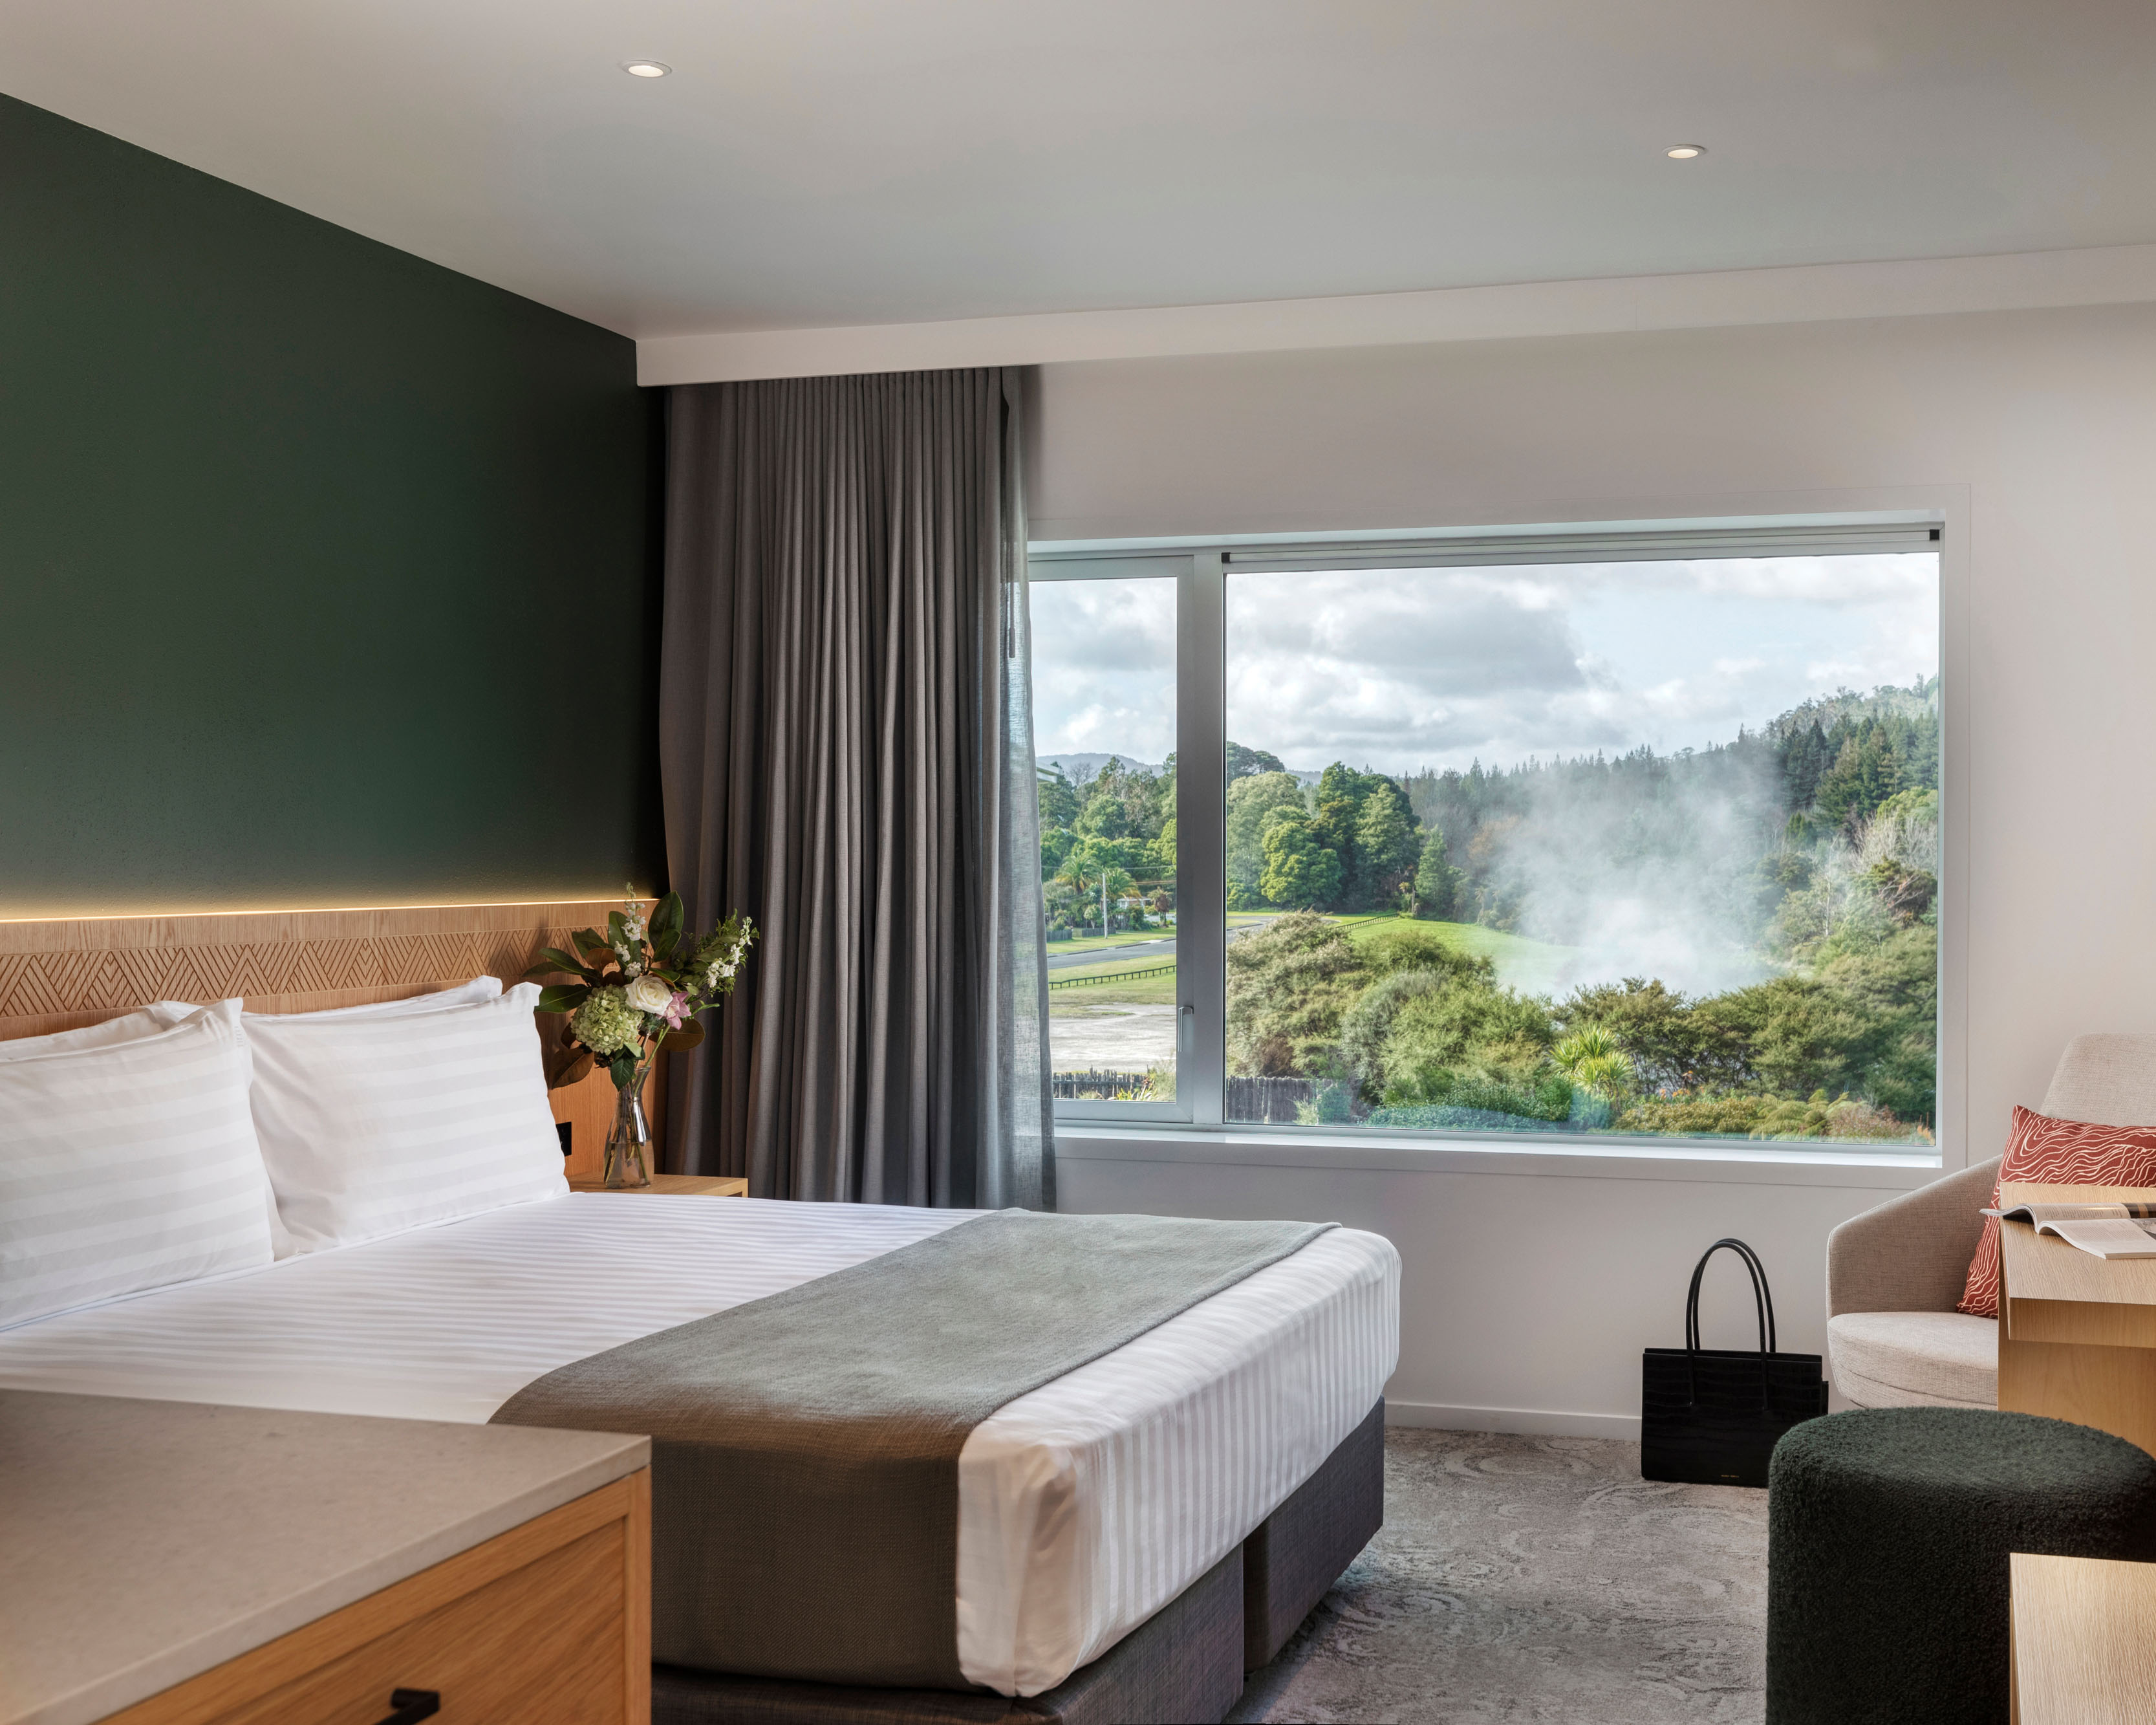 Hotel room at Rydges Rotorua, with a queen sized bed, desk and TV with views of the thermal valley out the window.